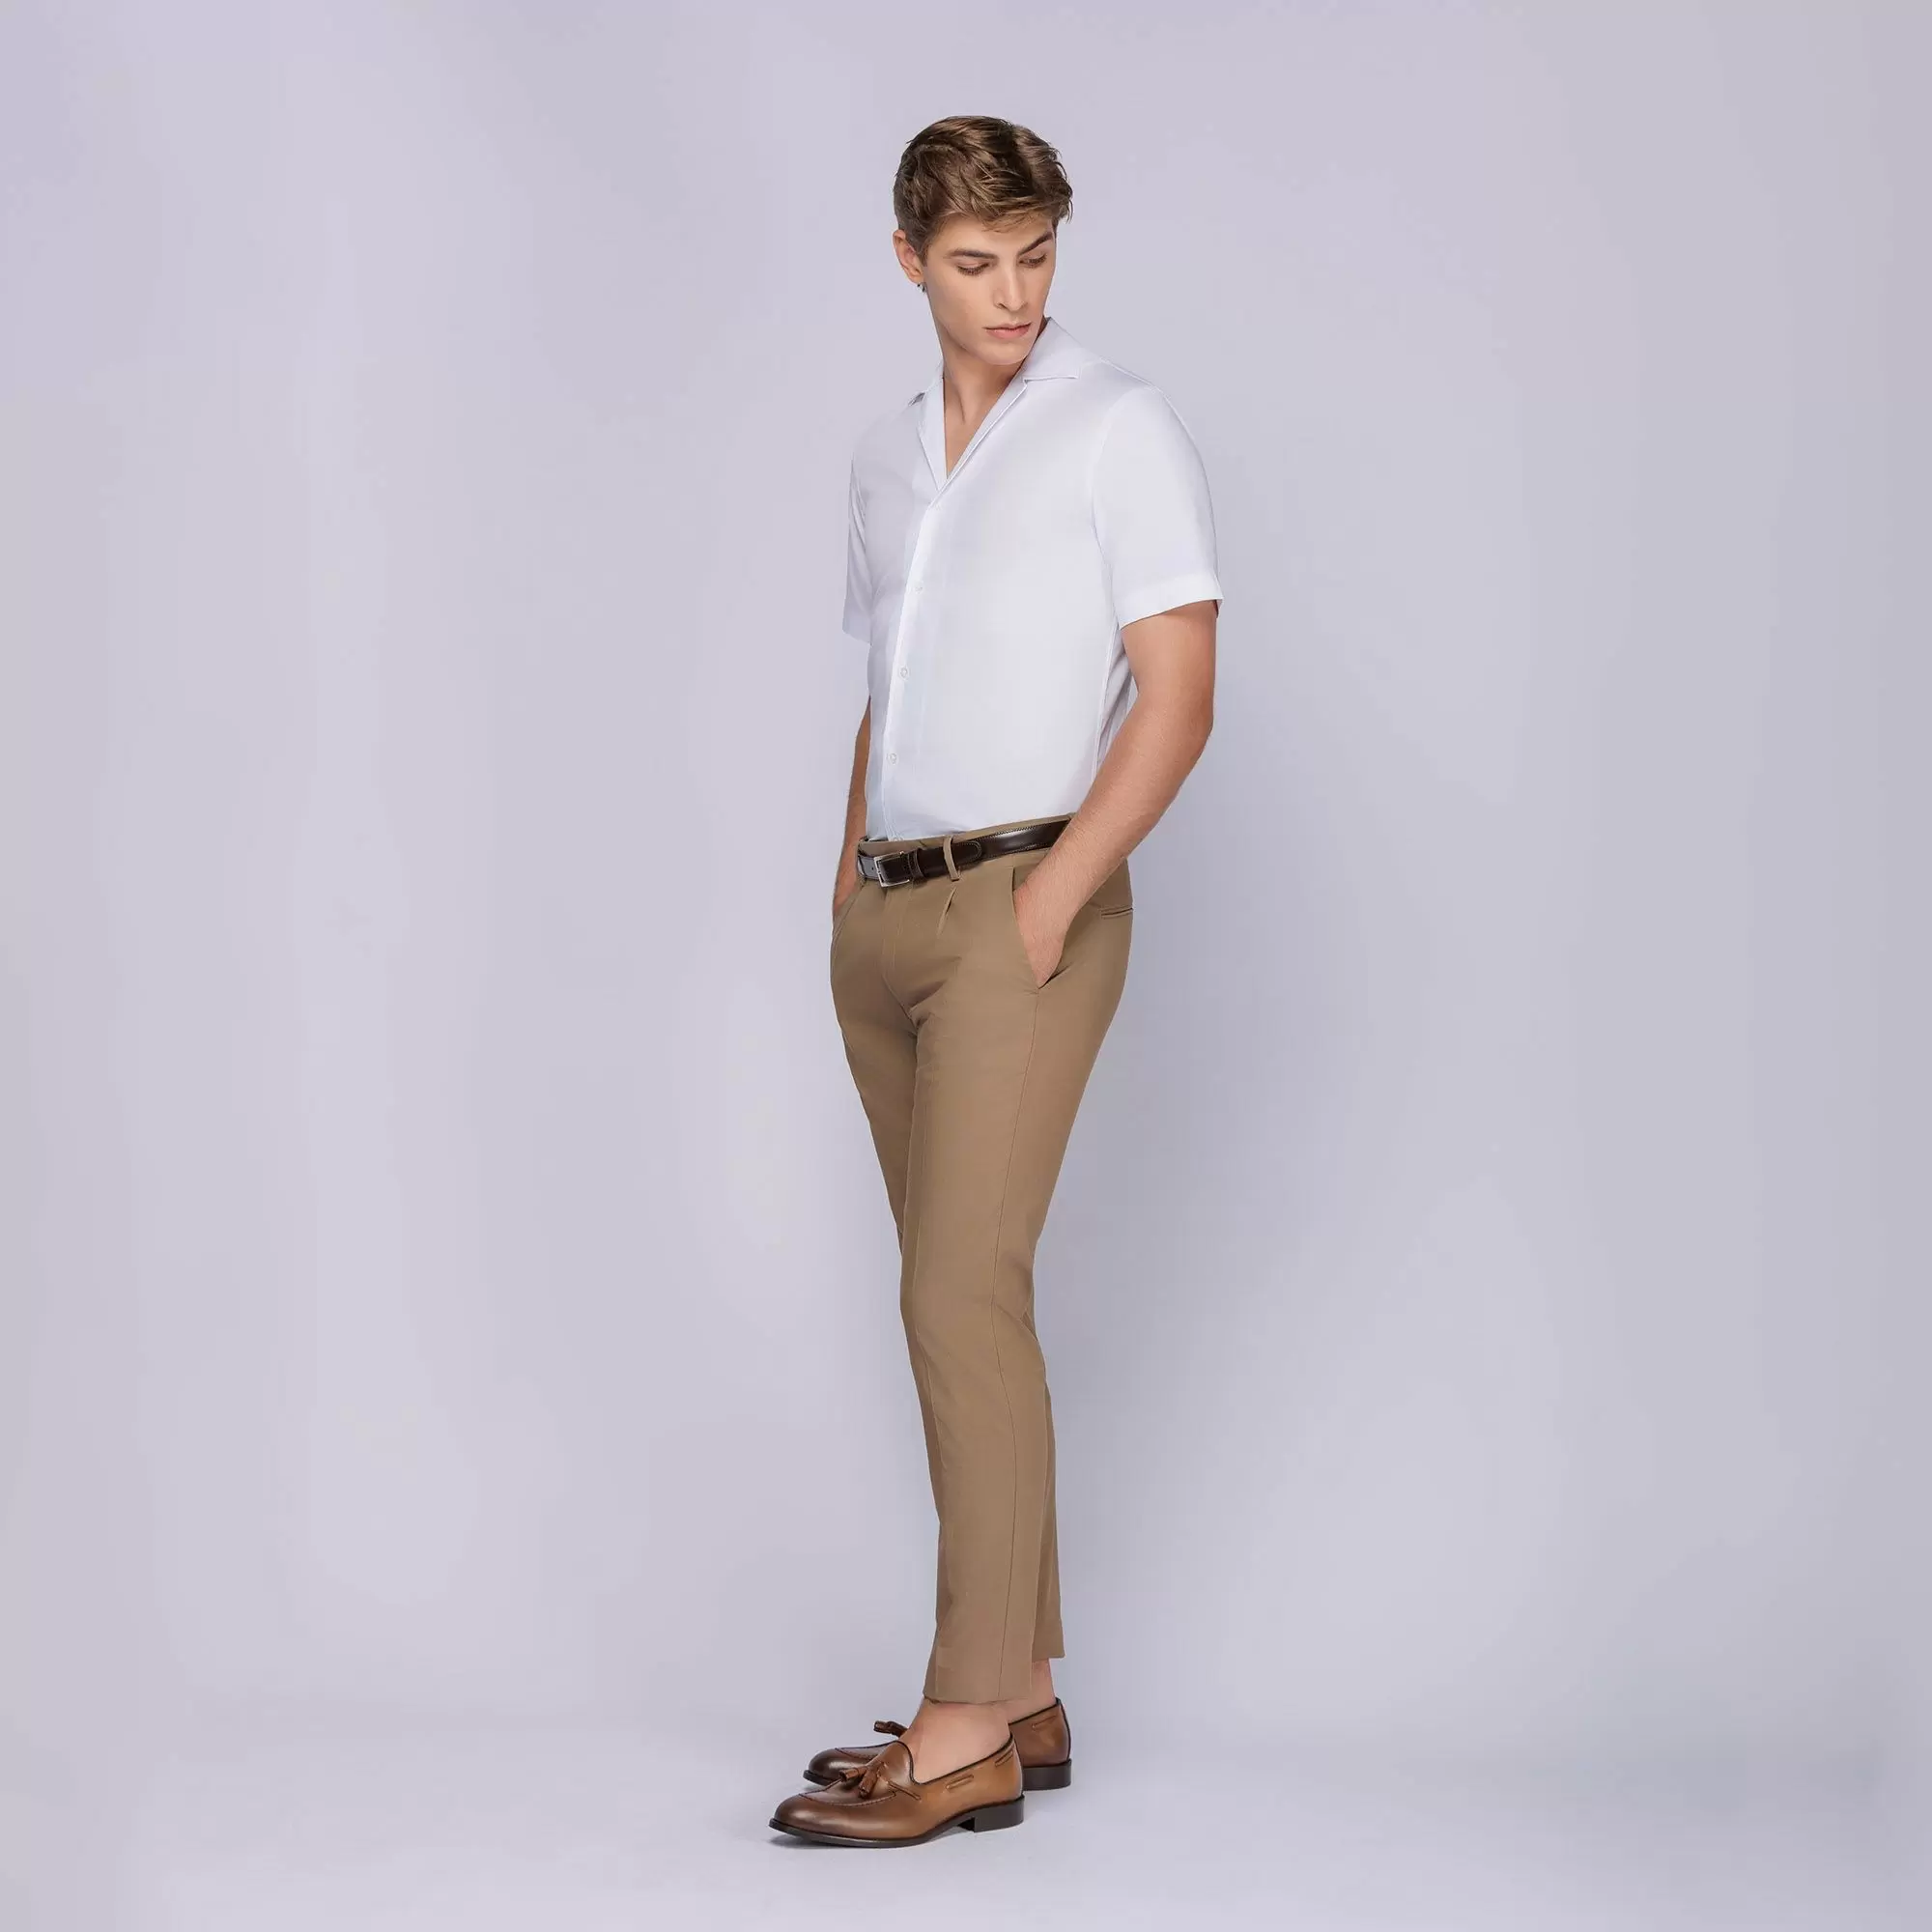 The Trousers Dress up, Dress Down Uniqlo pants dress up or down with ease.  Wide & pleated or clean & tapered, there's a pair for eve... | Instagram